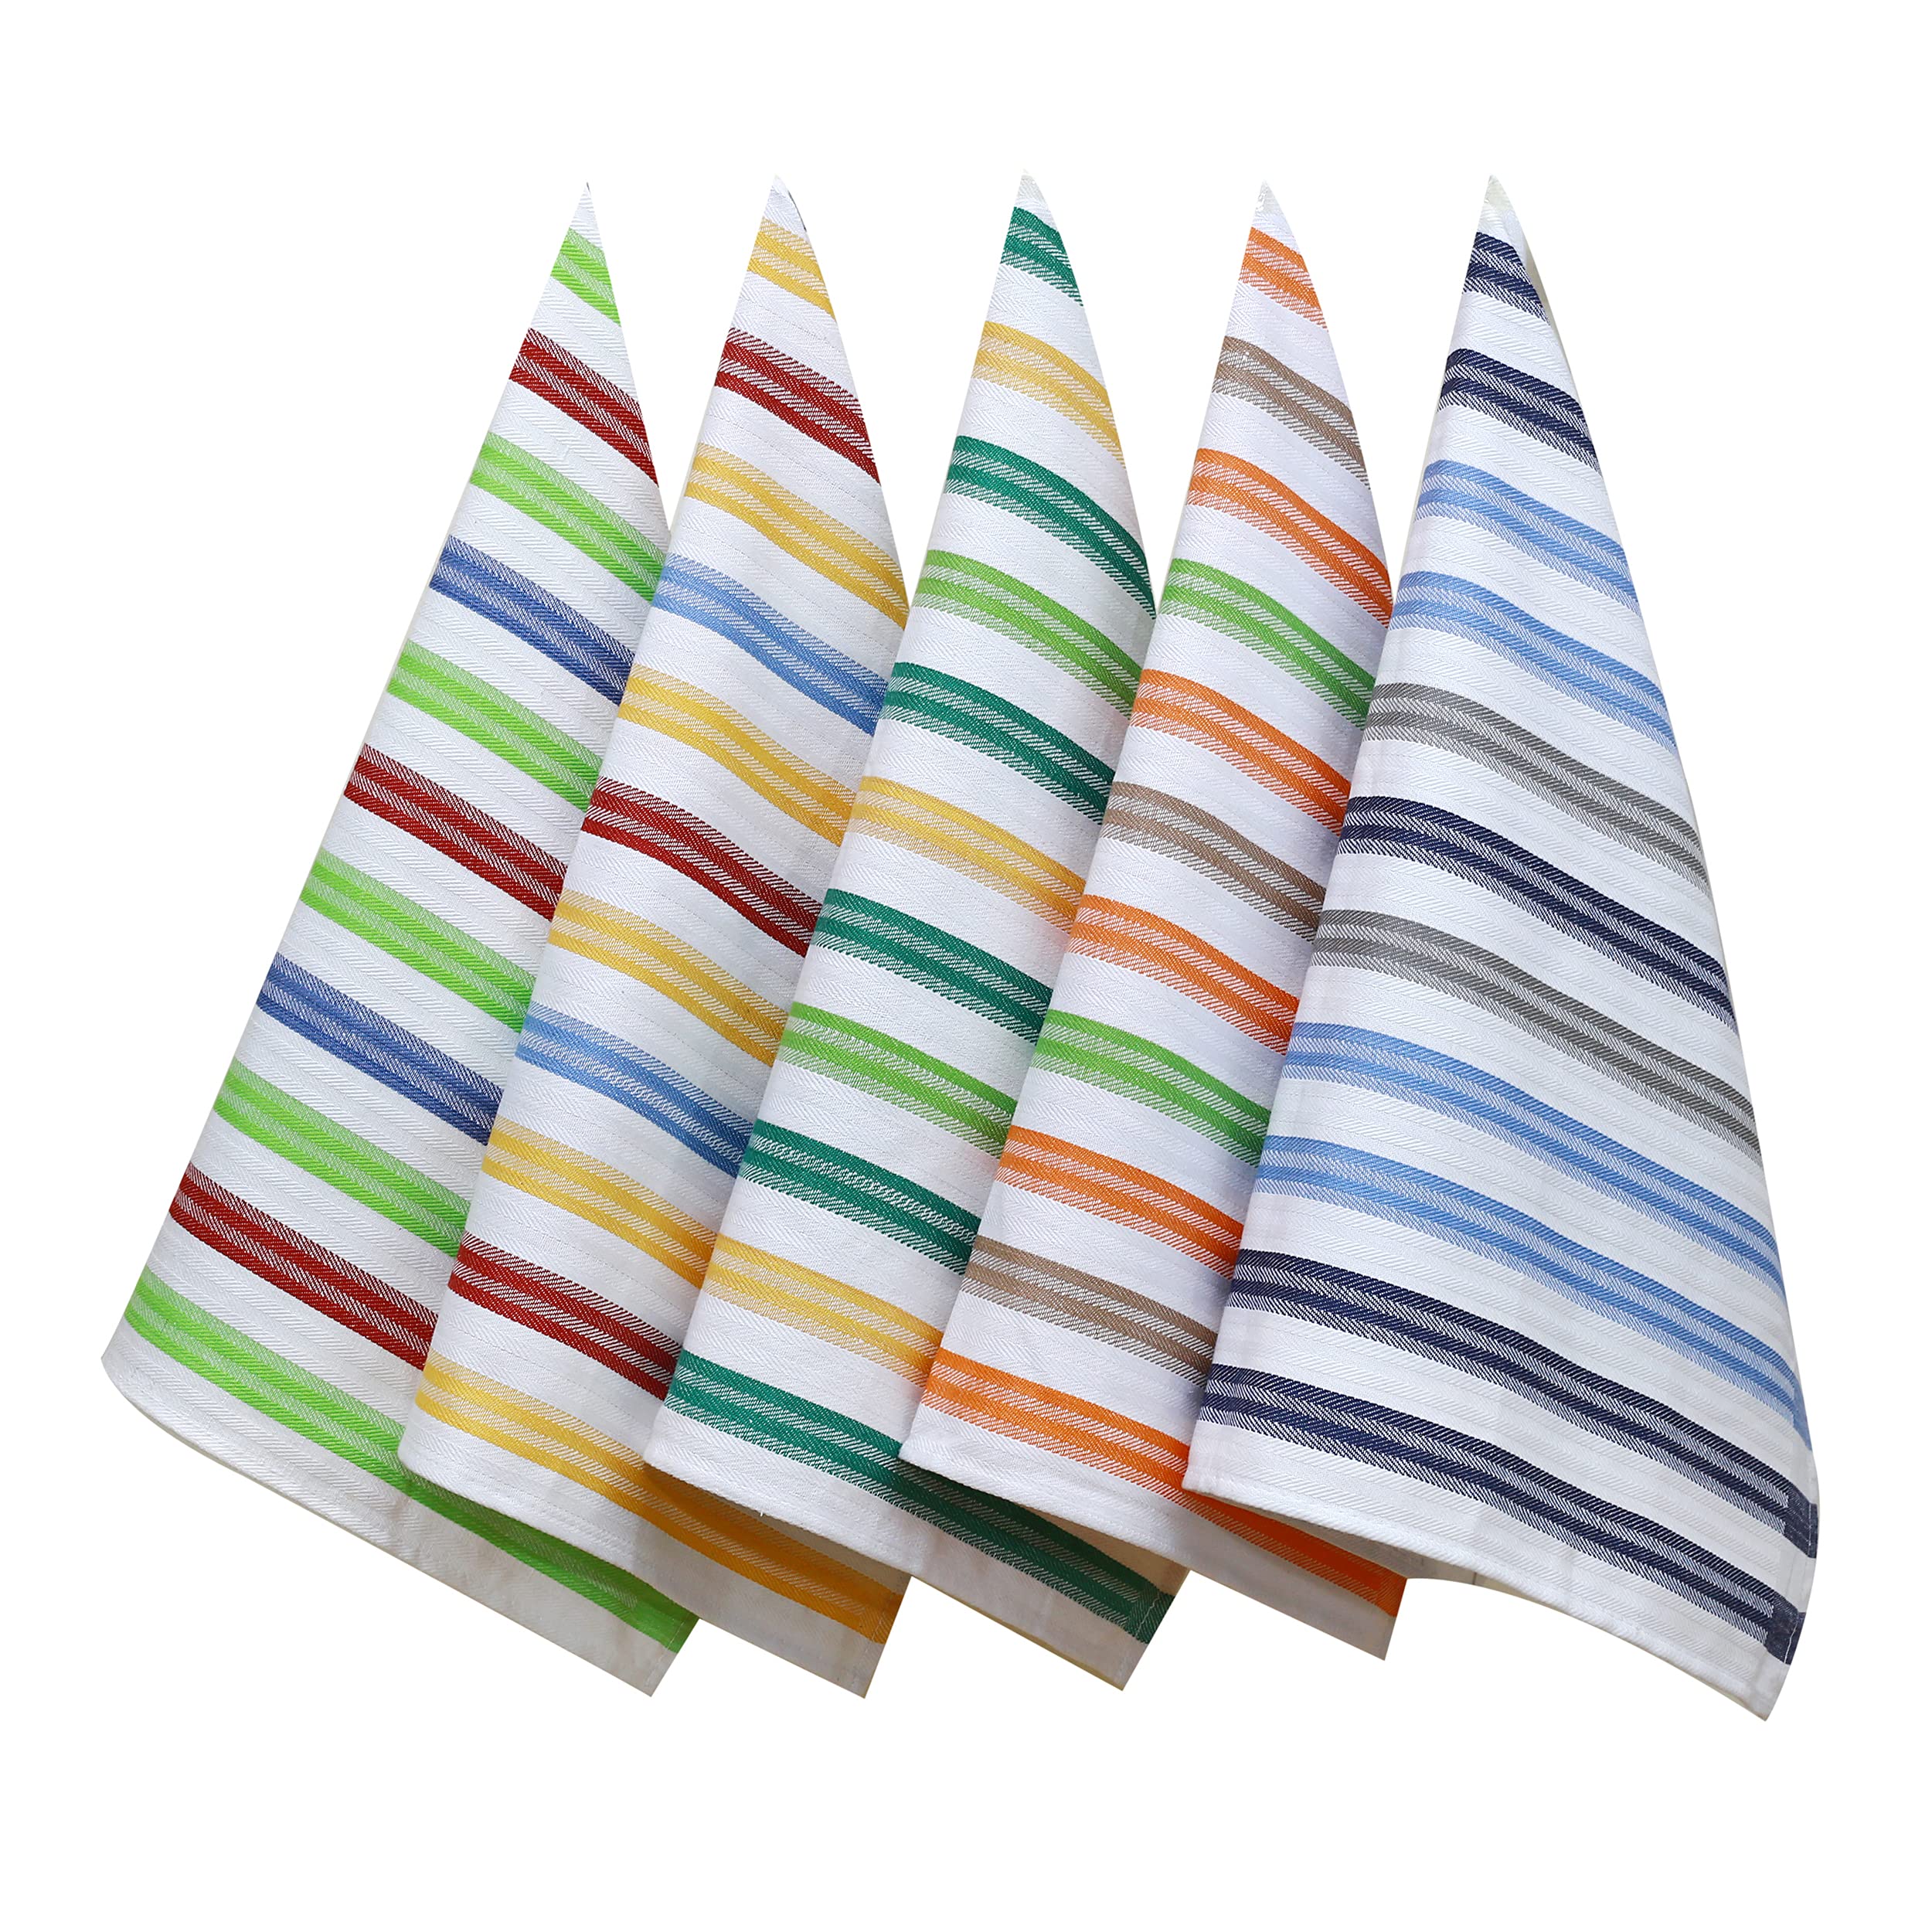 100% Cotton Tea Towels with Hanging Loop | 70 cm x 50 cm | Scratch Free, Machine Washable Dish Towels for drying dishes | Lint-Free, Super Absorbent Stripe Kitchen Towels (5 Pack)